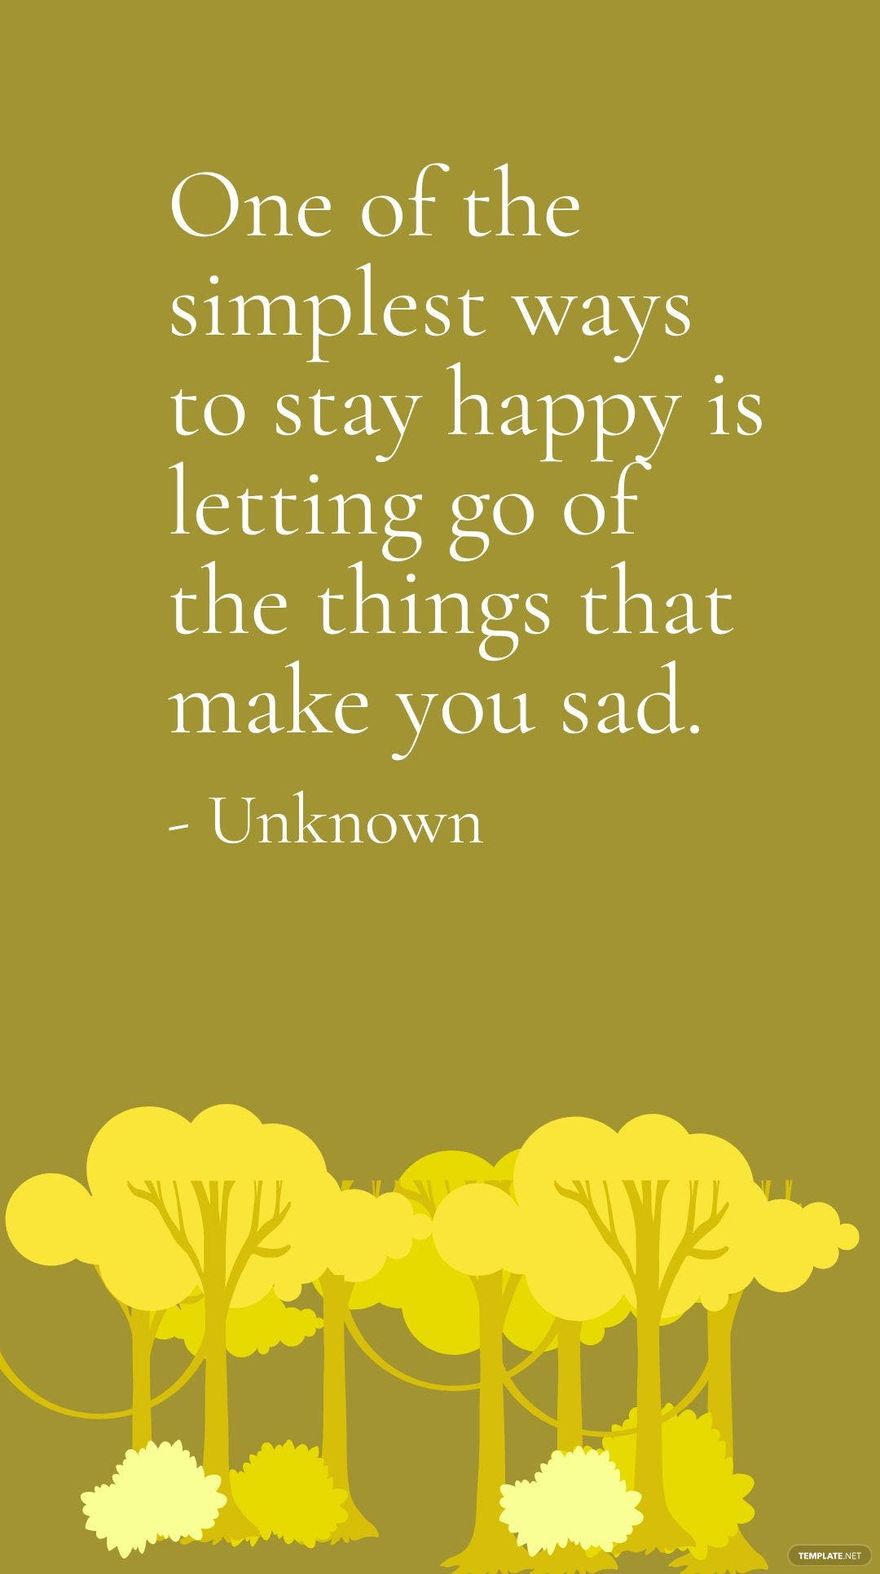 Unknown - One of the simplest ways to stay happy is letting go of the things that make you sad.